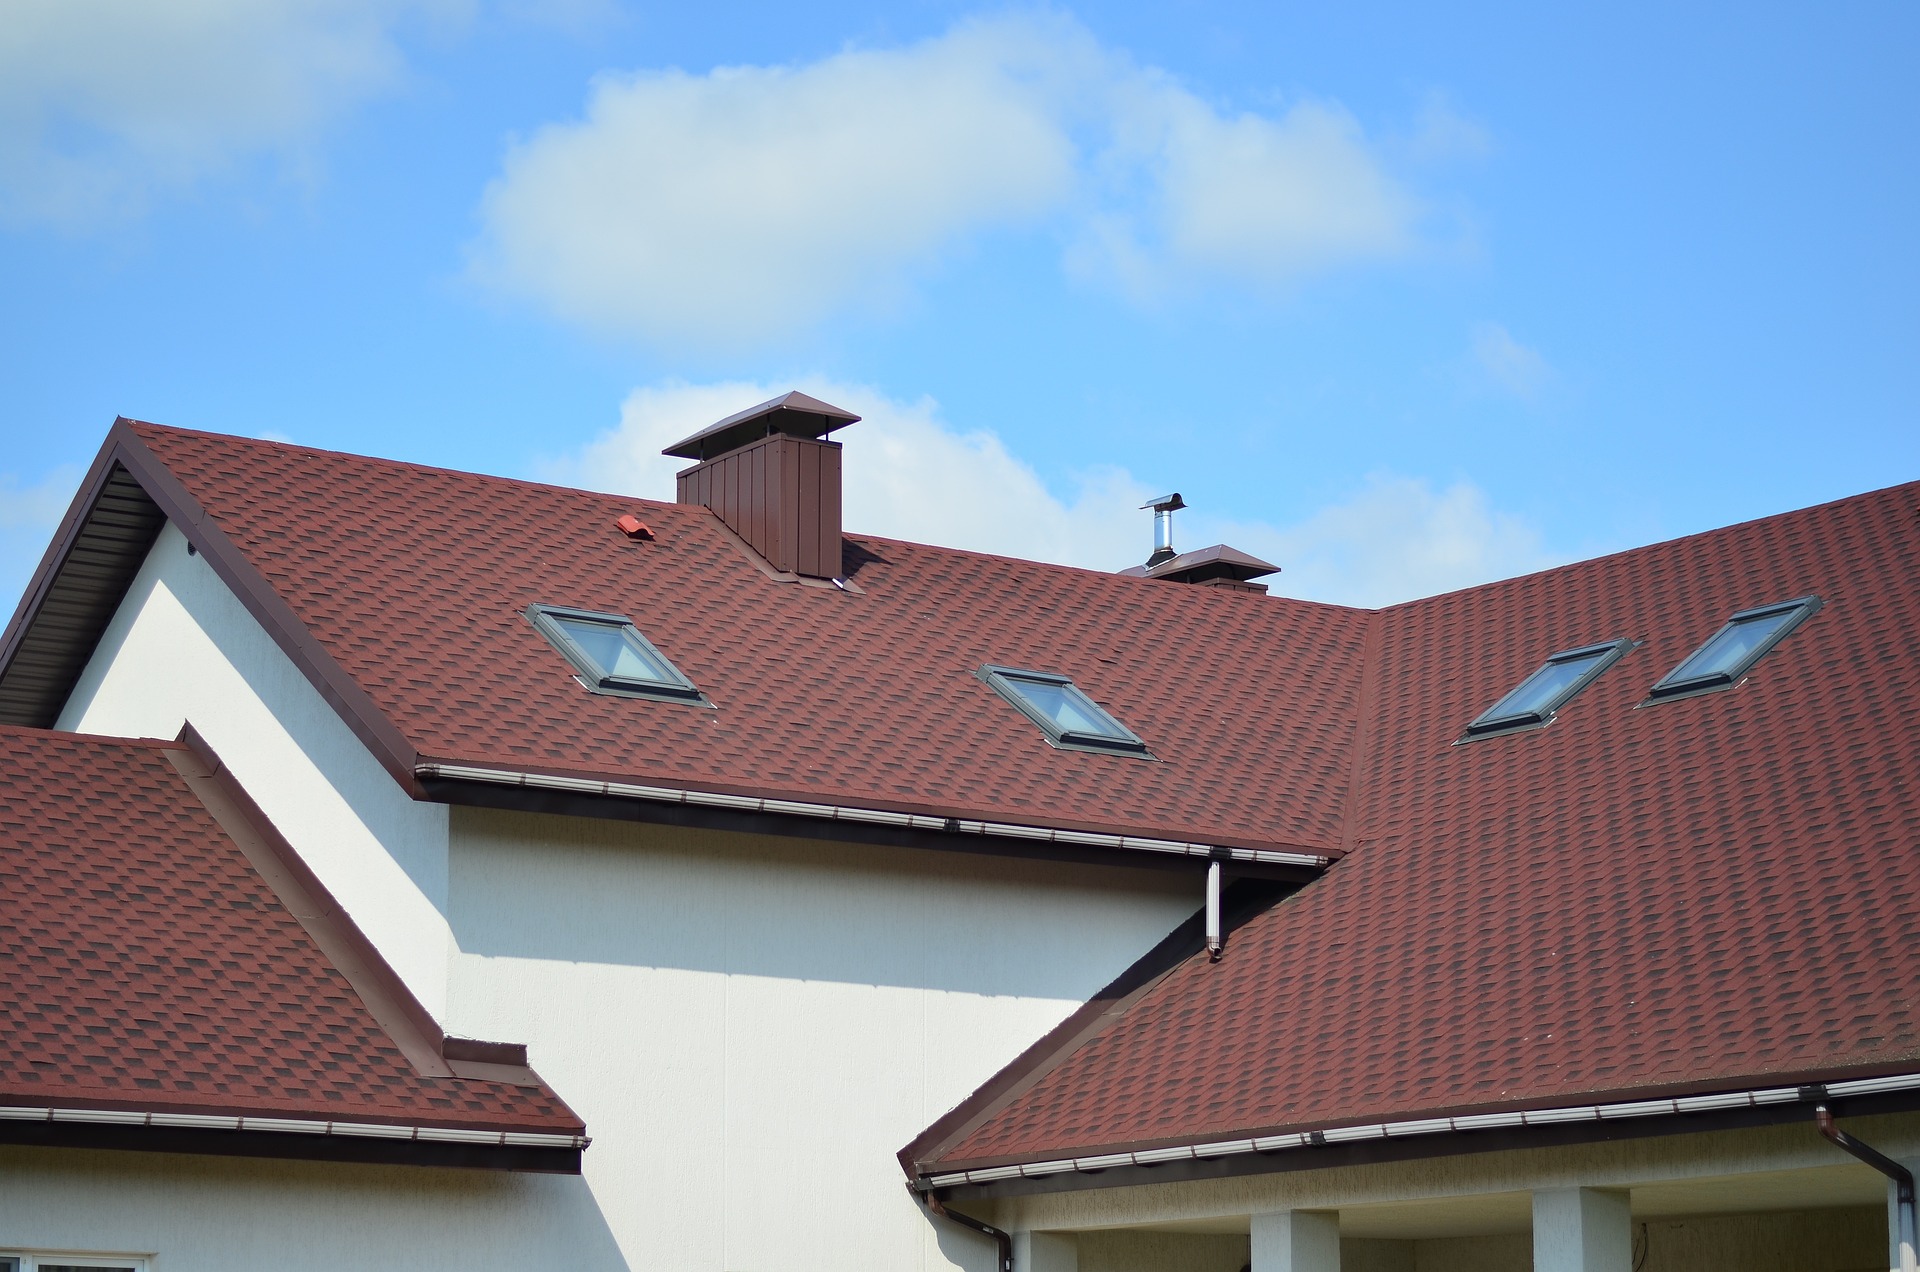 Main roofing materials